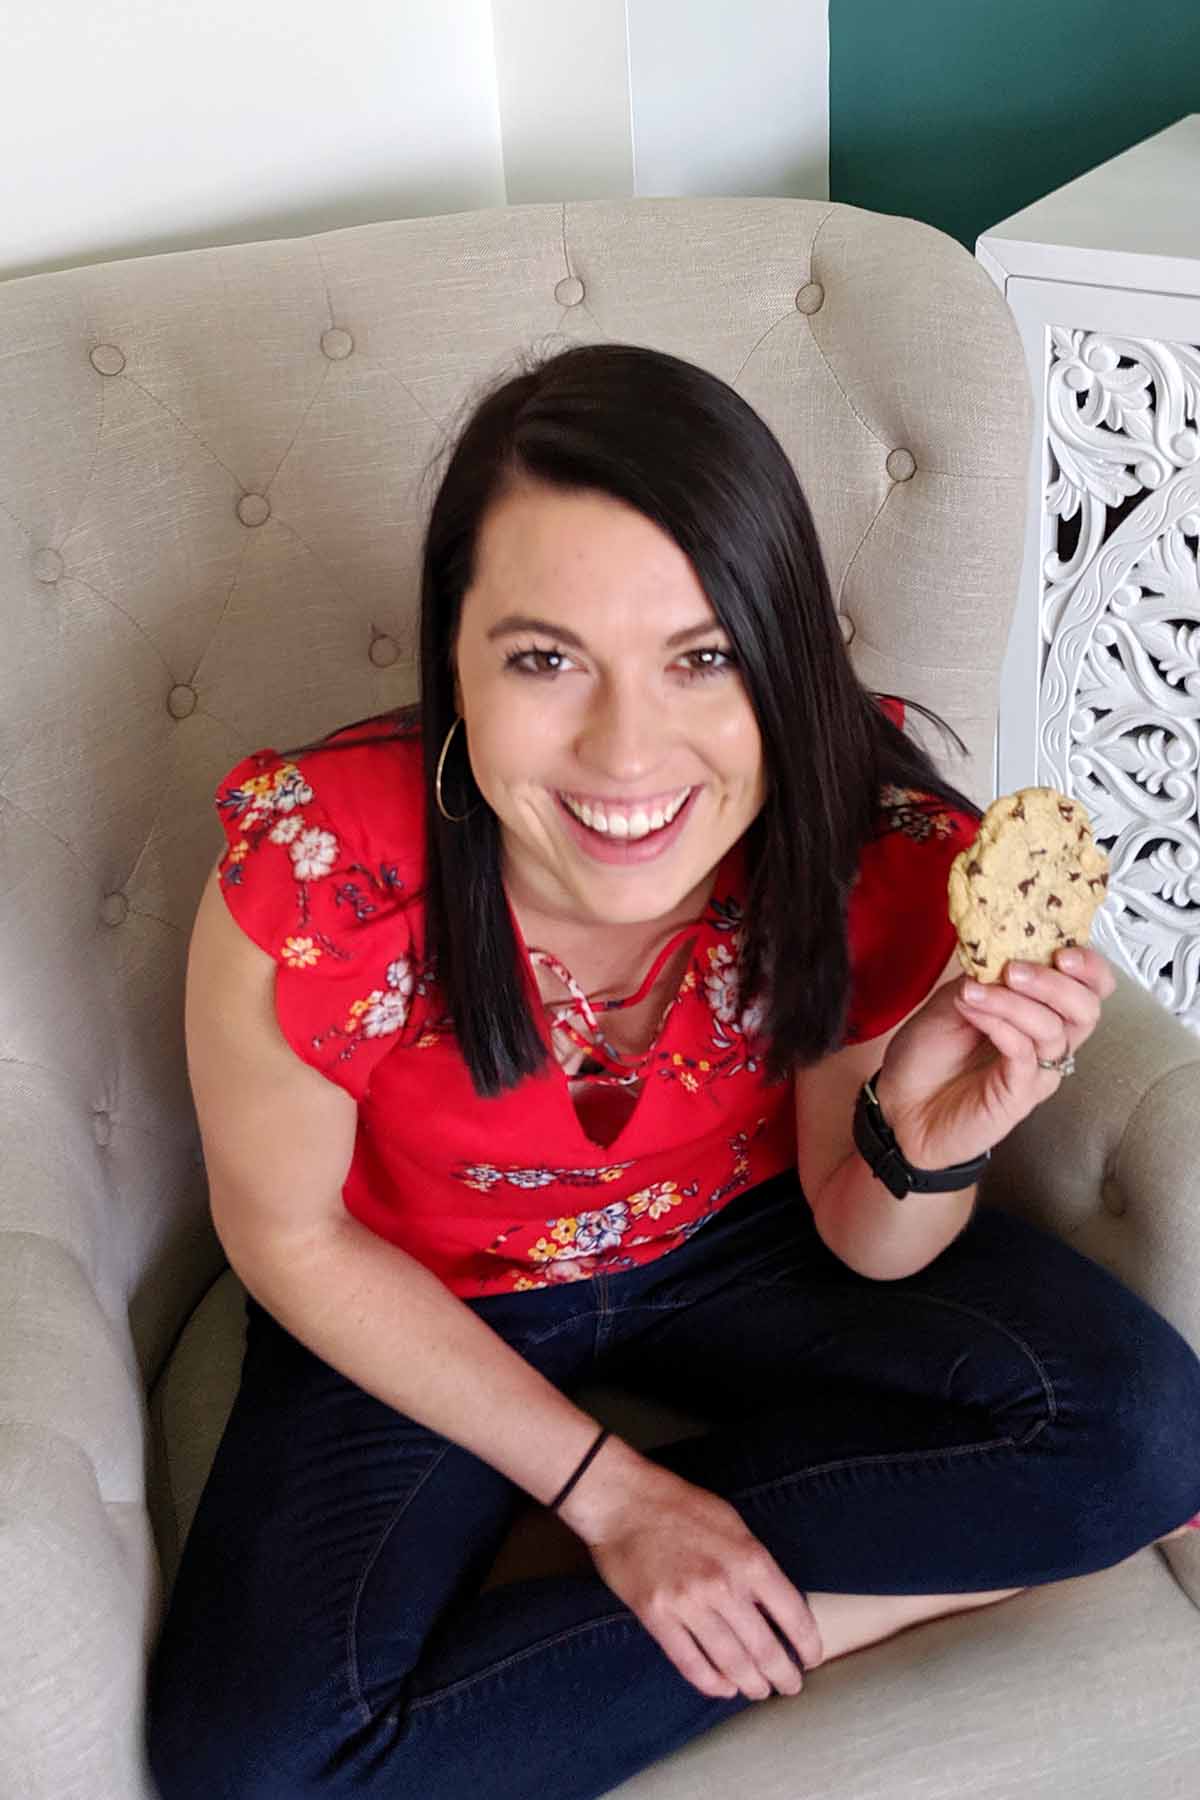 girl with brown hair and red shirt holding a cookie.